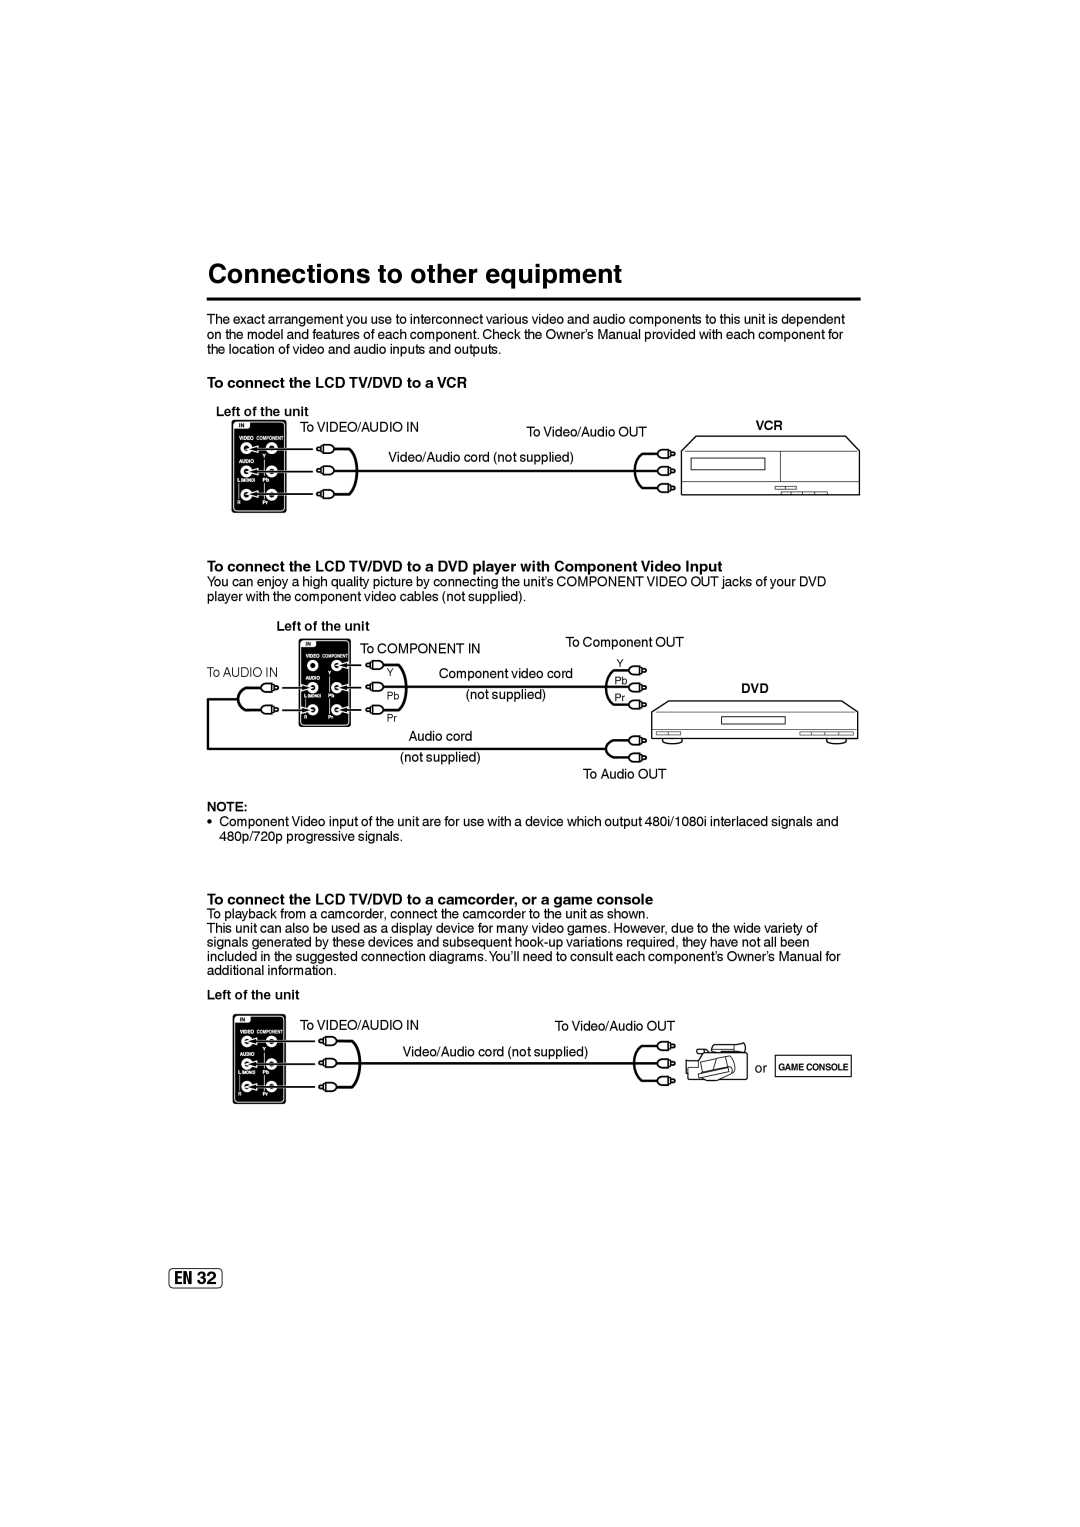 Sansui SLEDVD197 owner manual Connections to other equipment, To connect the LCD TV/DVD to a VCR, Left of the unit 